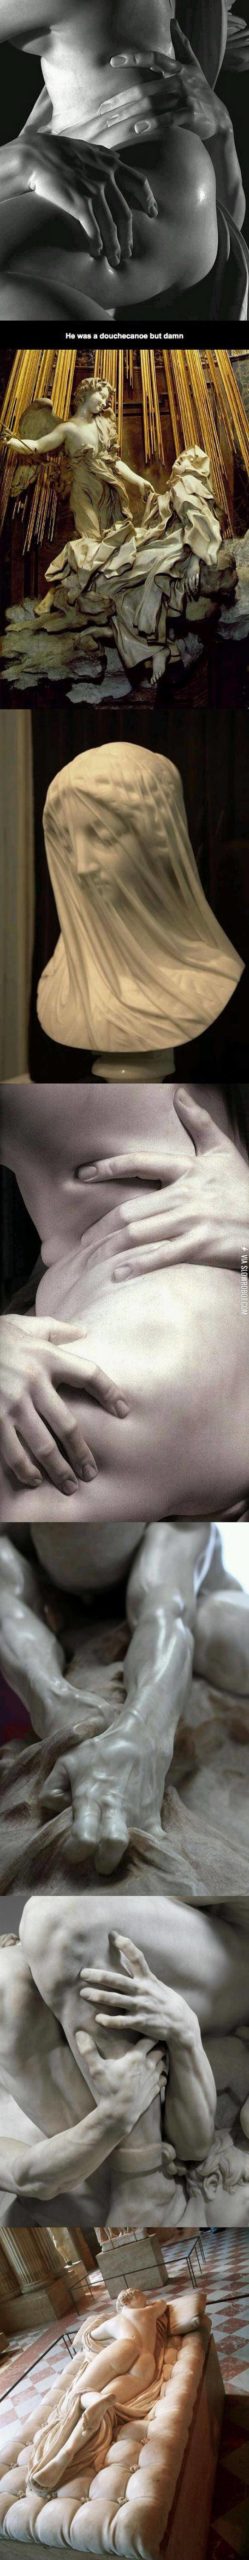 Sculptor+Gian+Lorenzo+Bernini+Did+All+This+Using+Marble+In+The+17th+Century